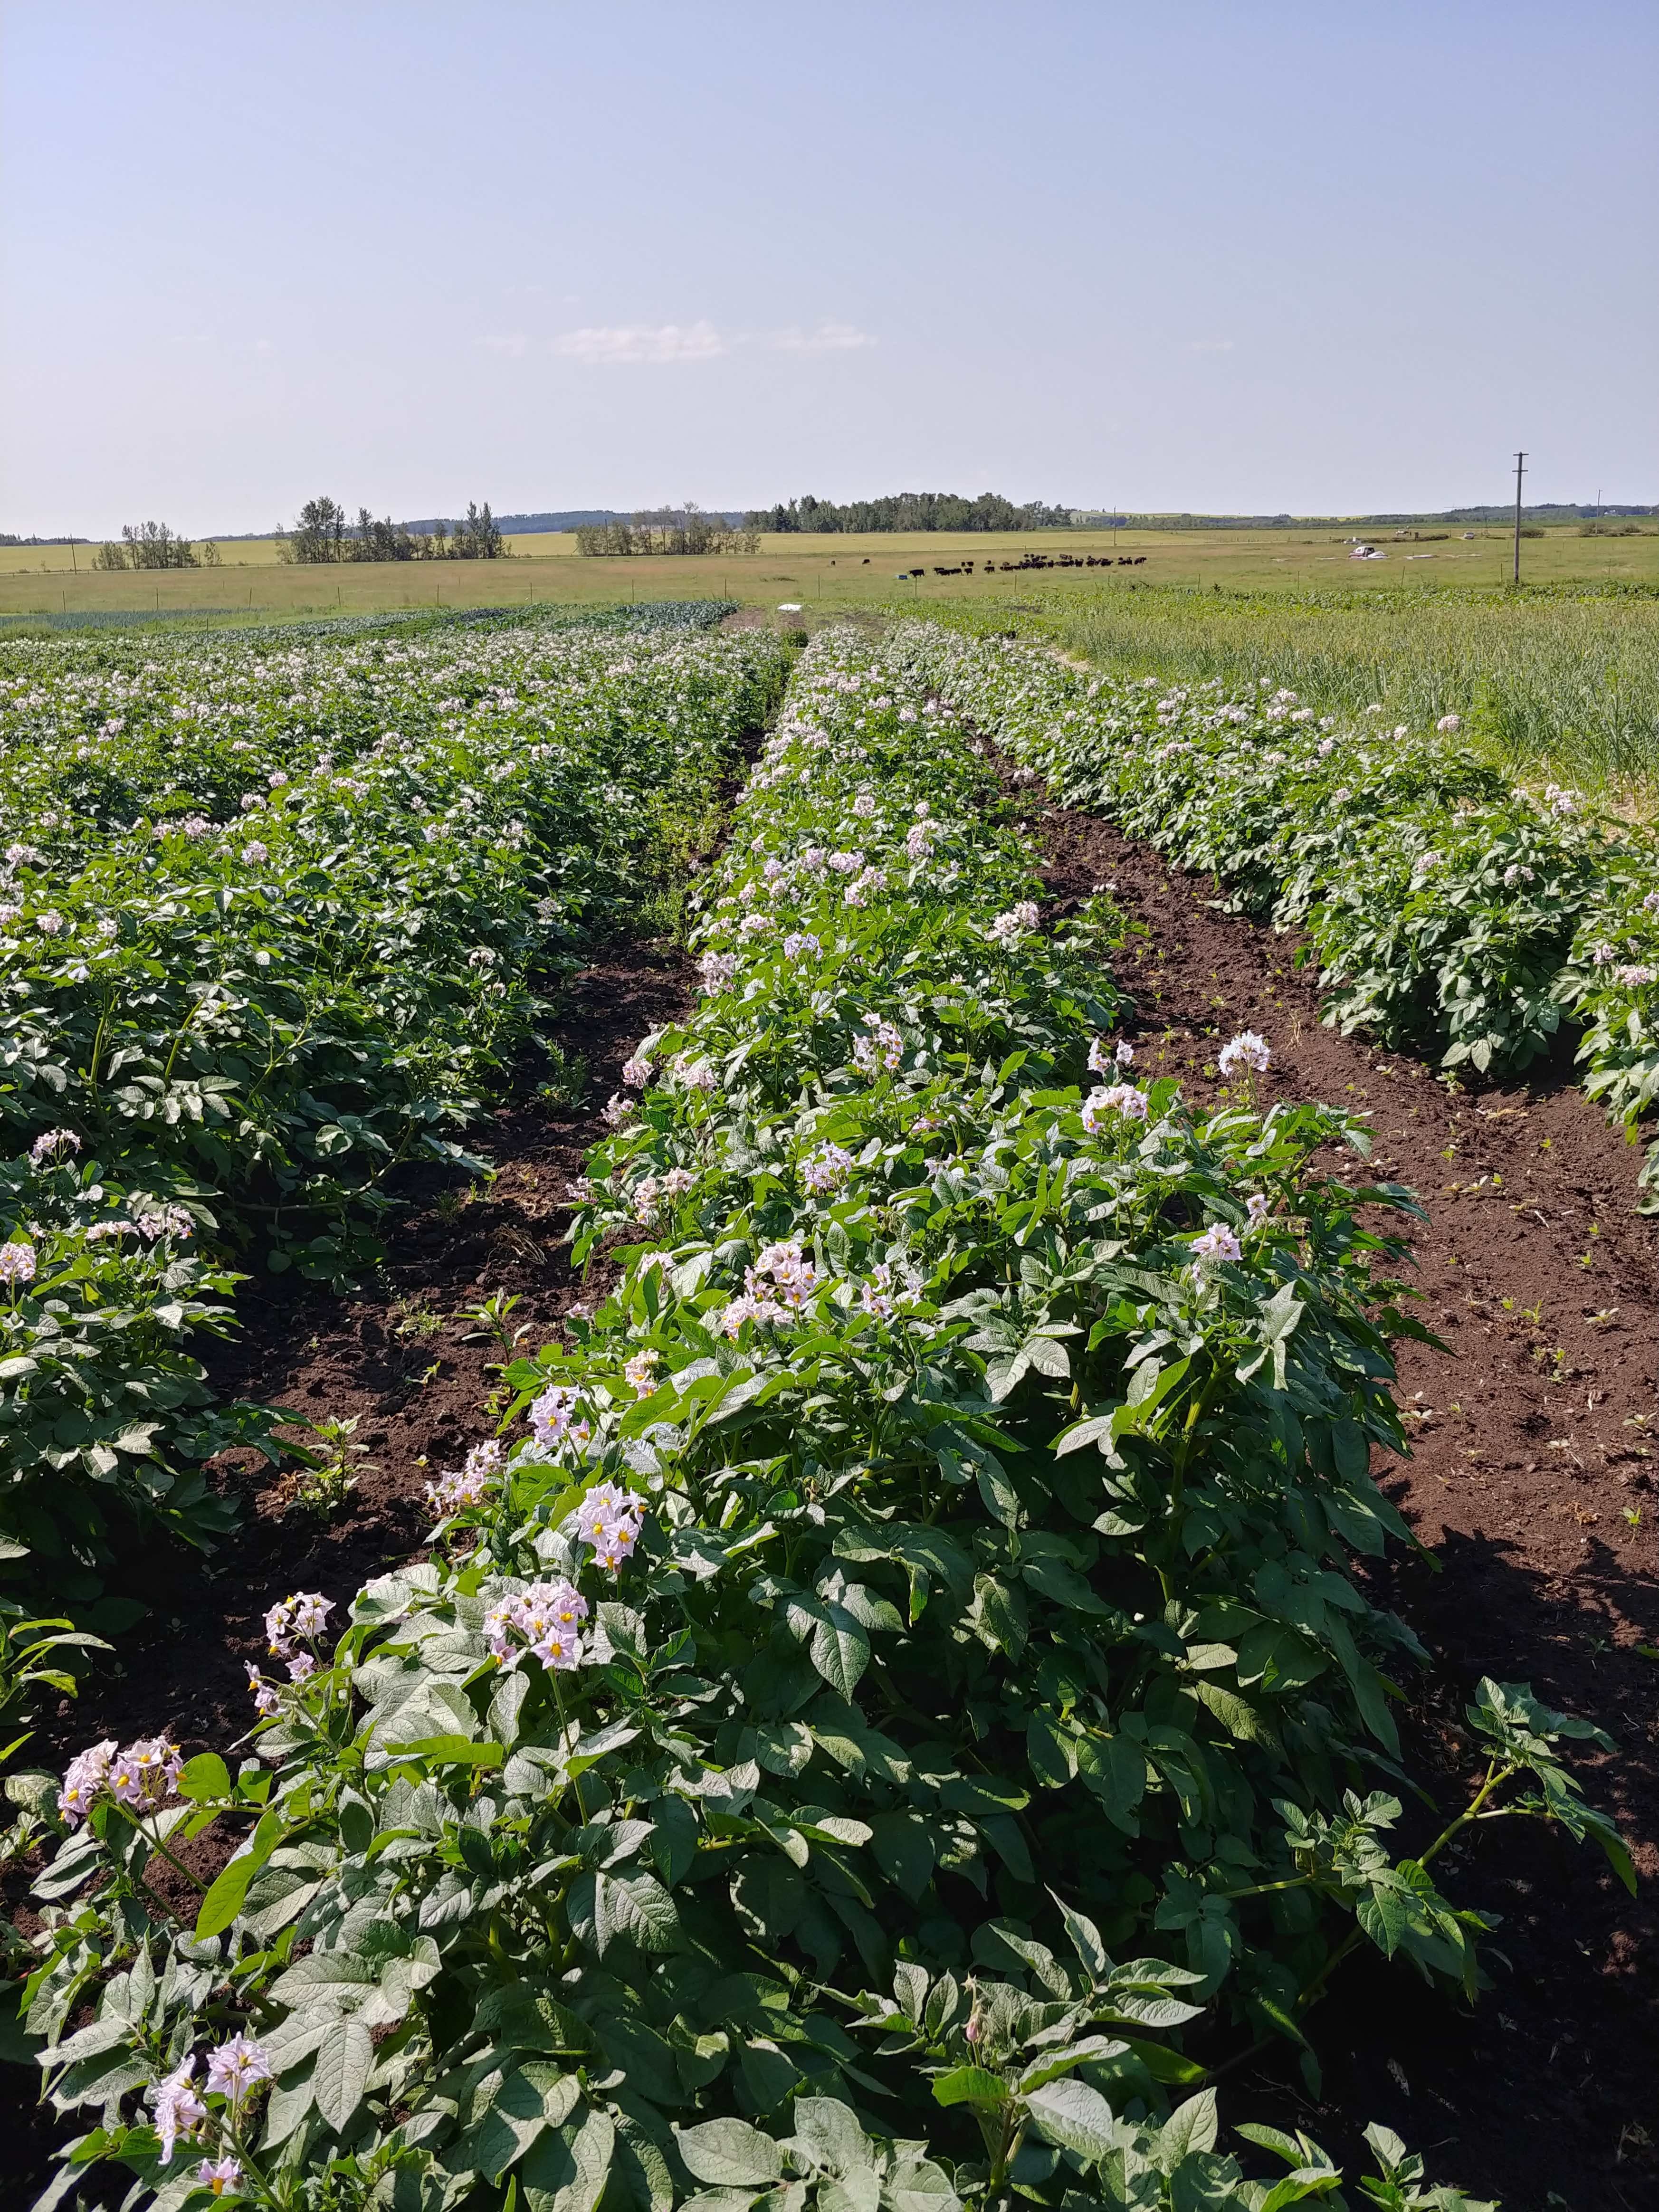 Previous Happening: Farm Happenings for August 6, 2019 - Potatoes and Beef